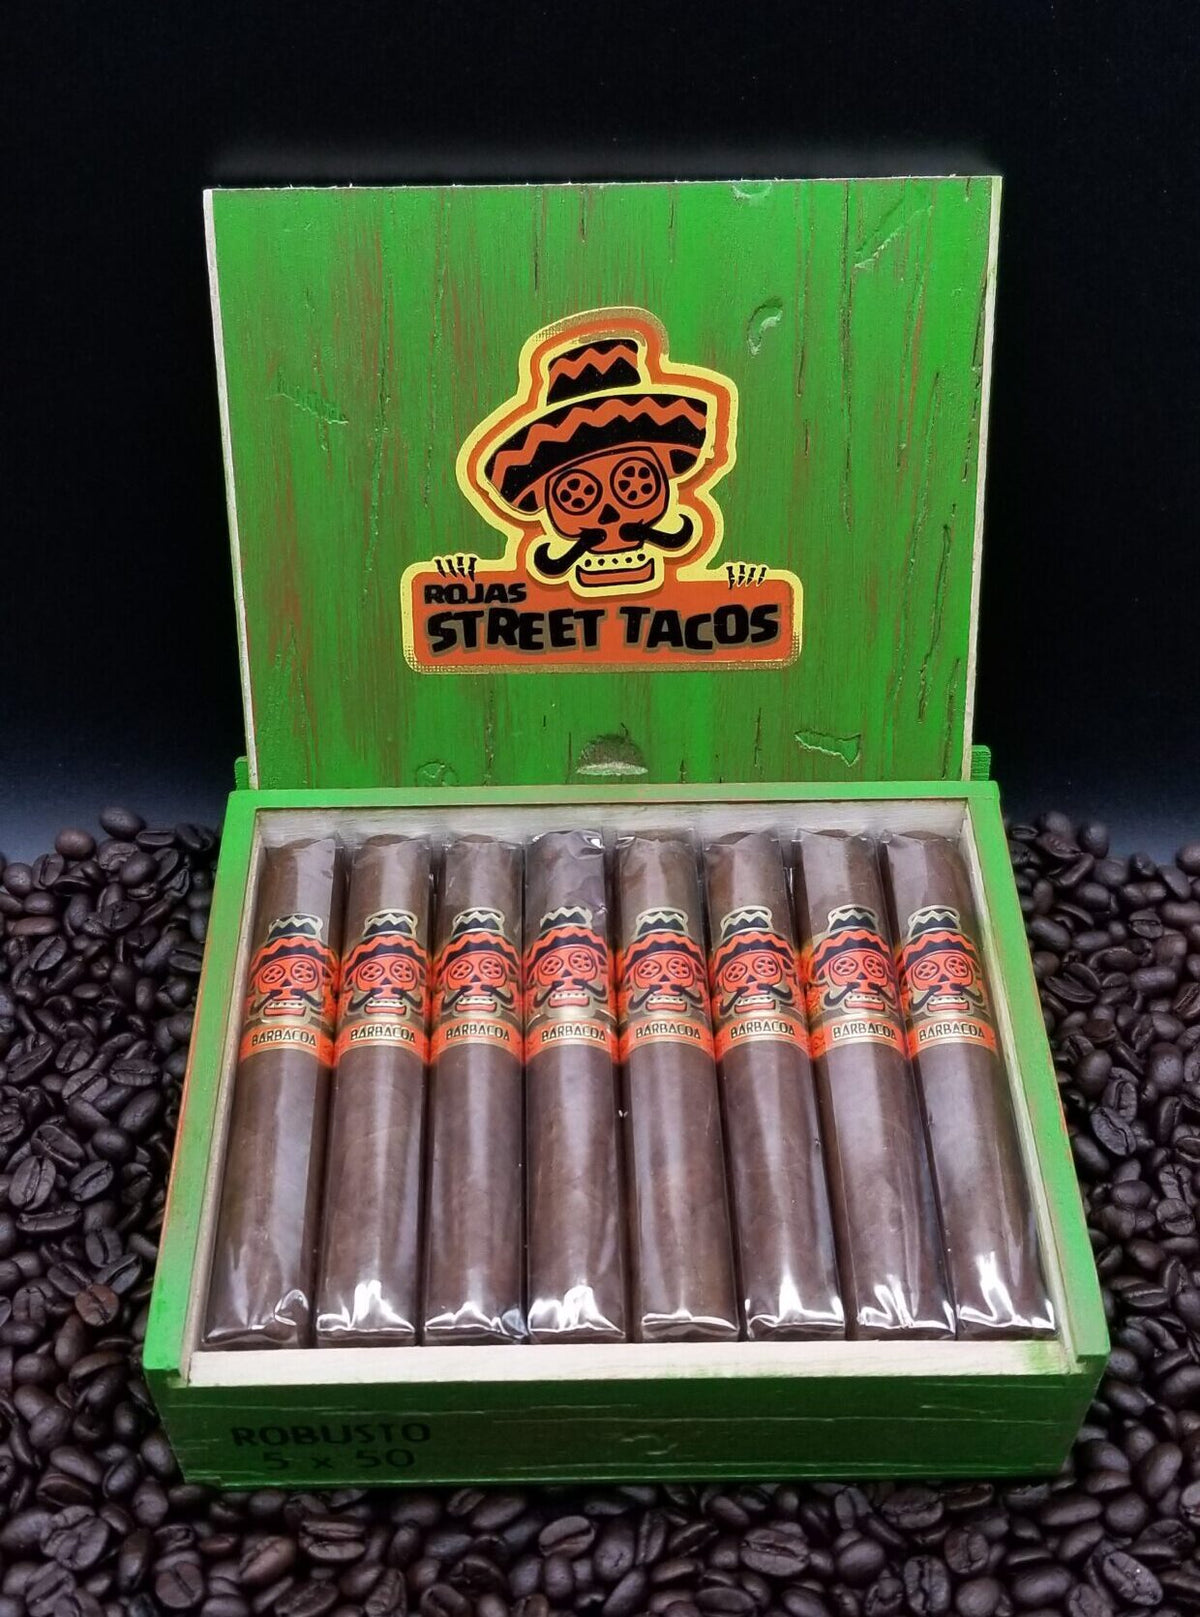 Rojas Street Taco Robusto cigars supplied by Sir Louis Cigars